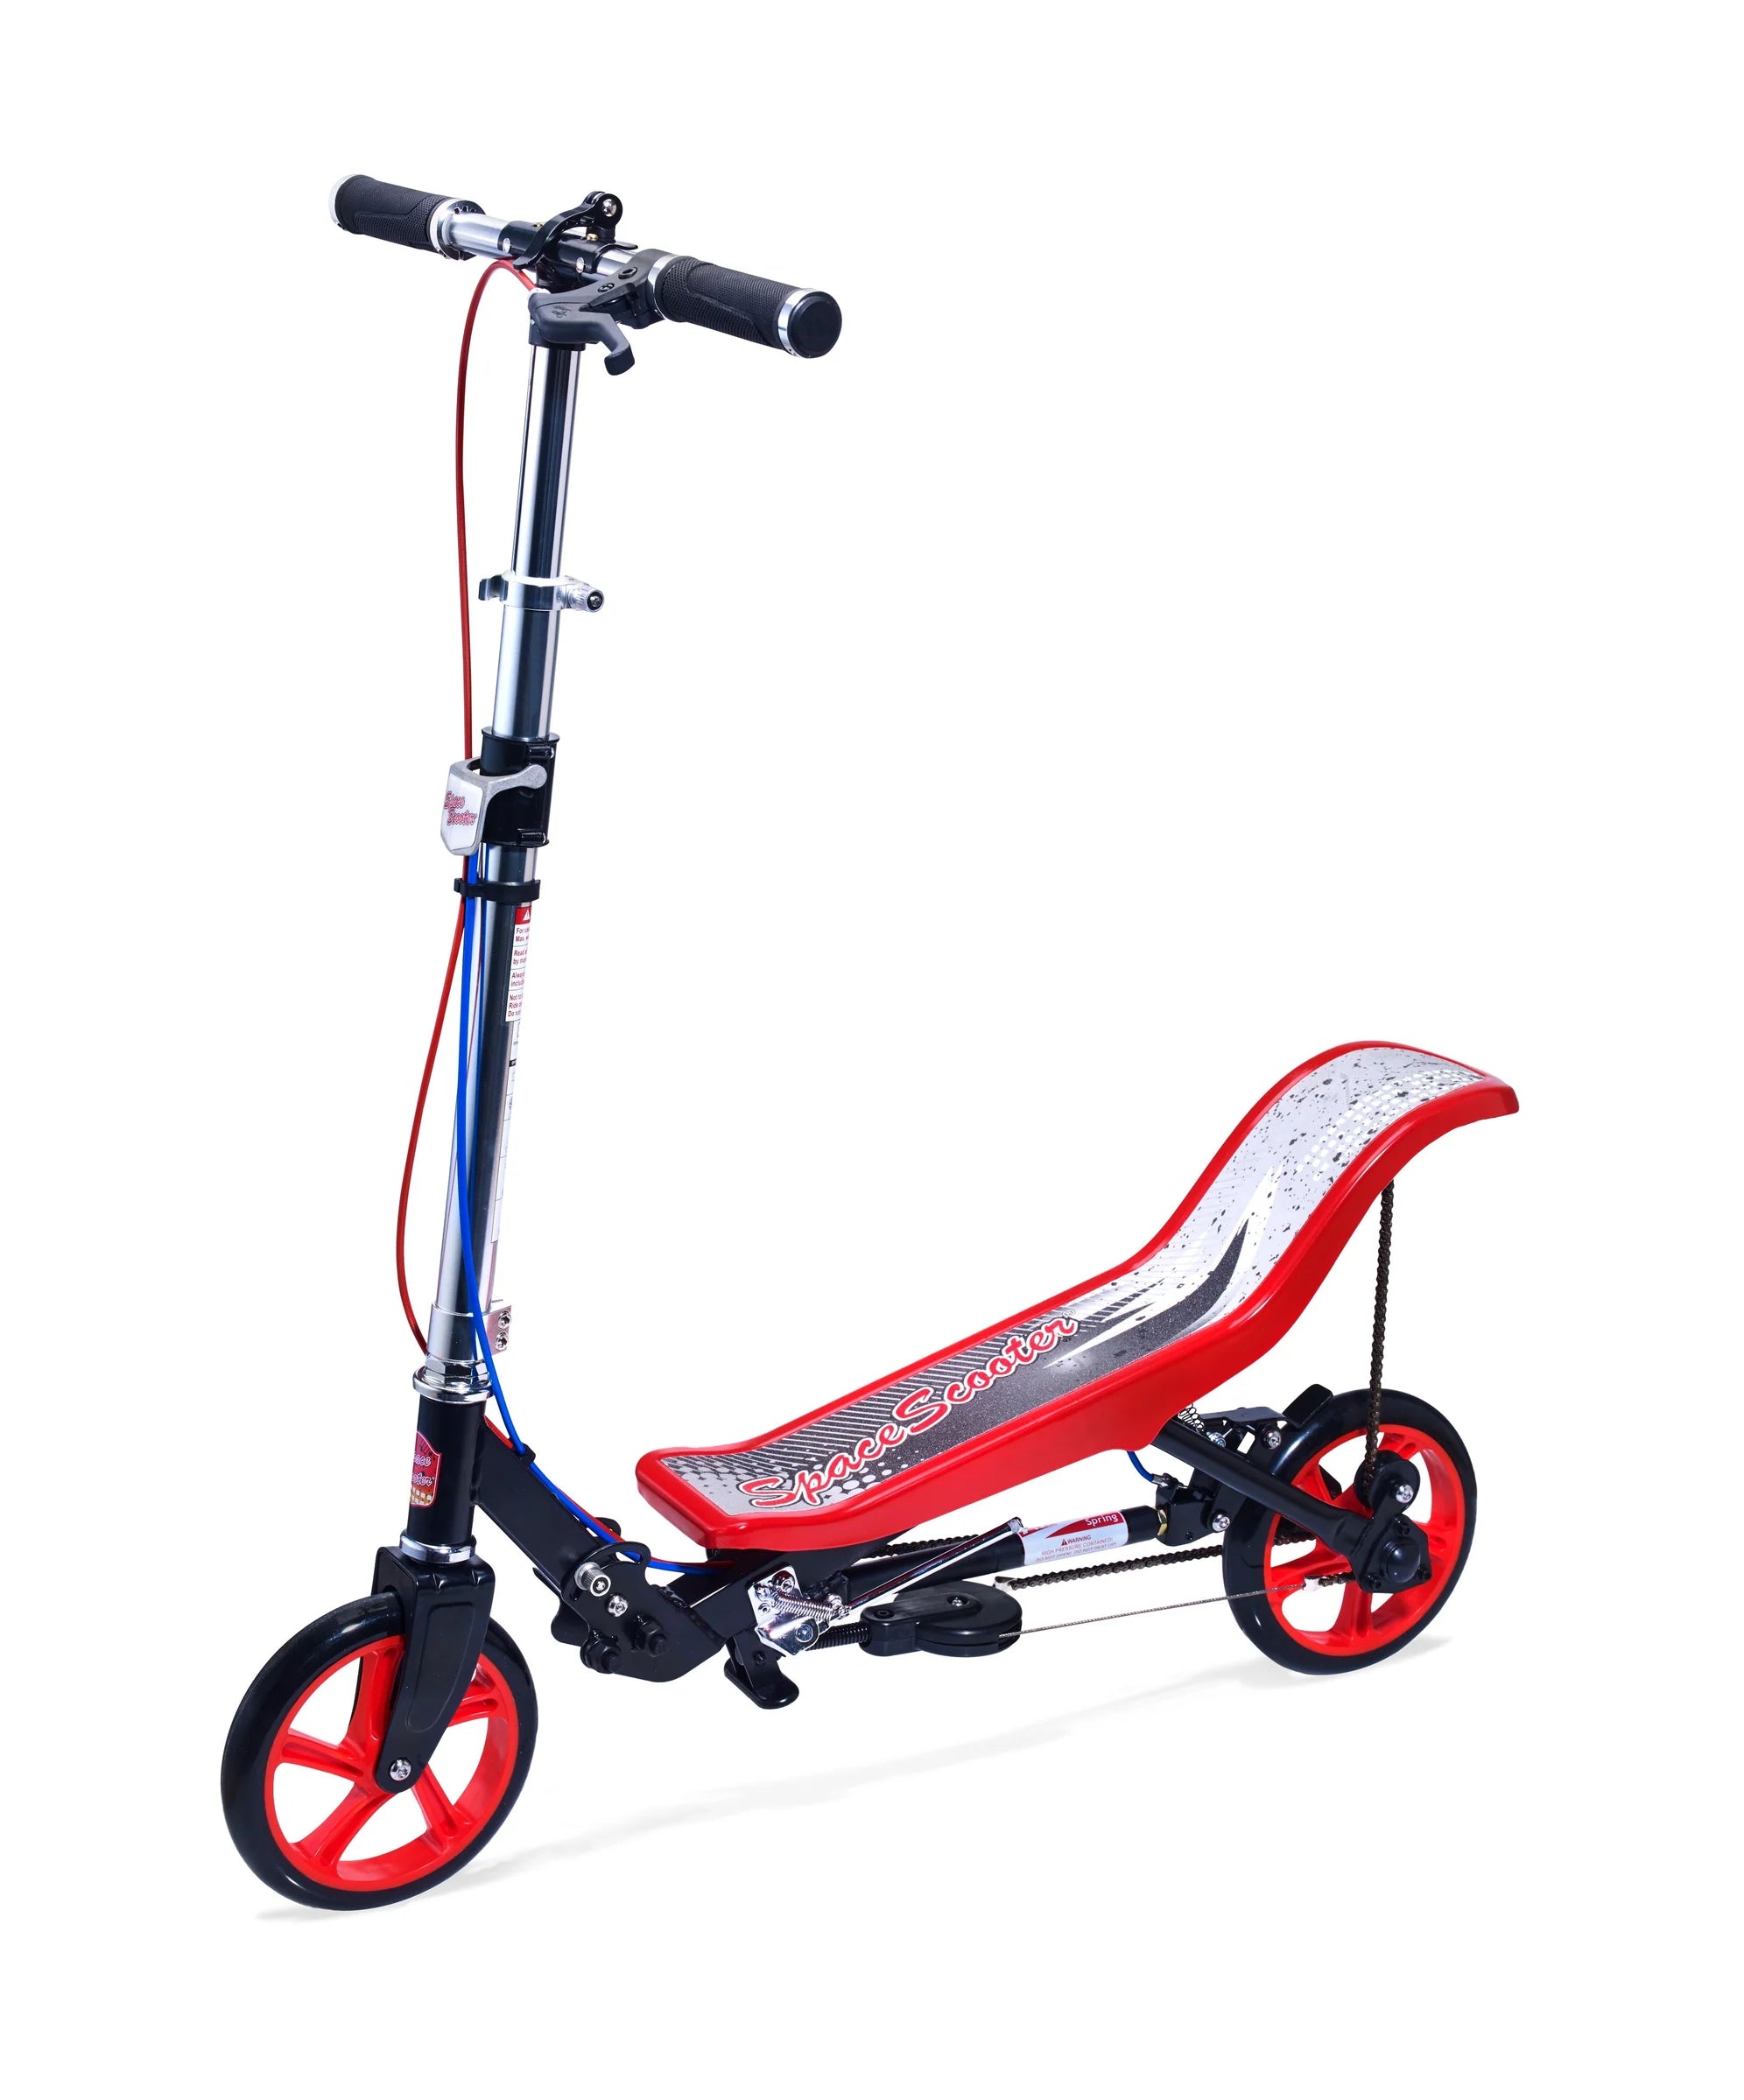 Refurbished Space Scooter (X590) - Black/Red (REFSPBARE3)